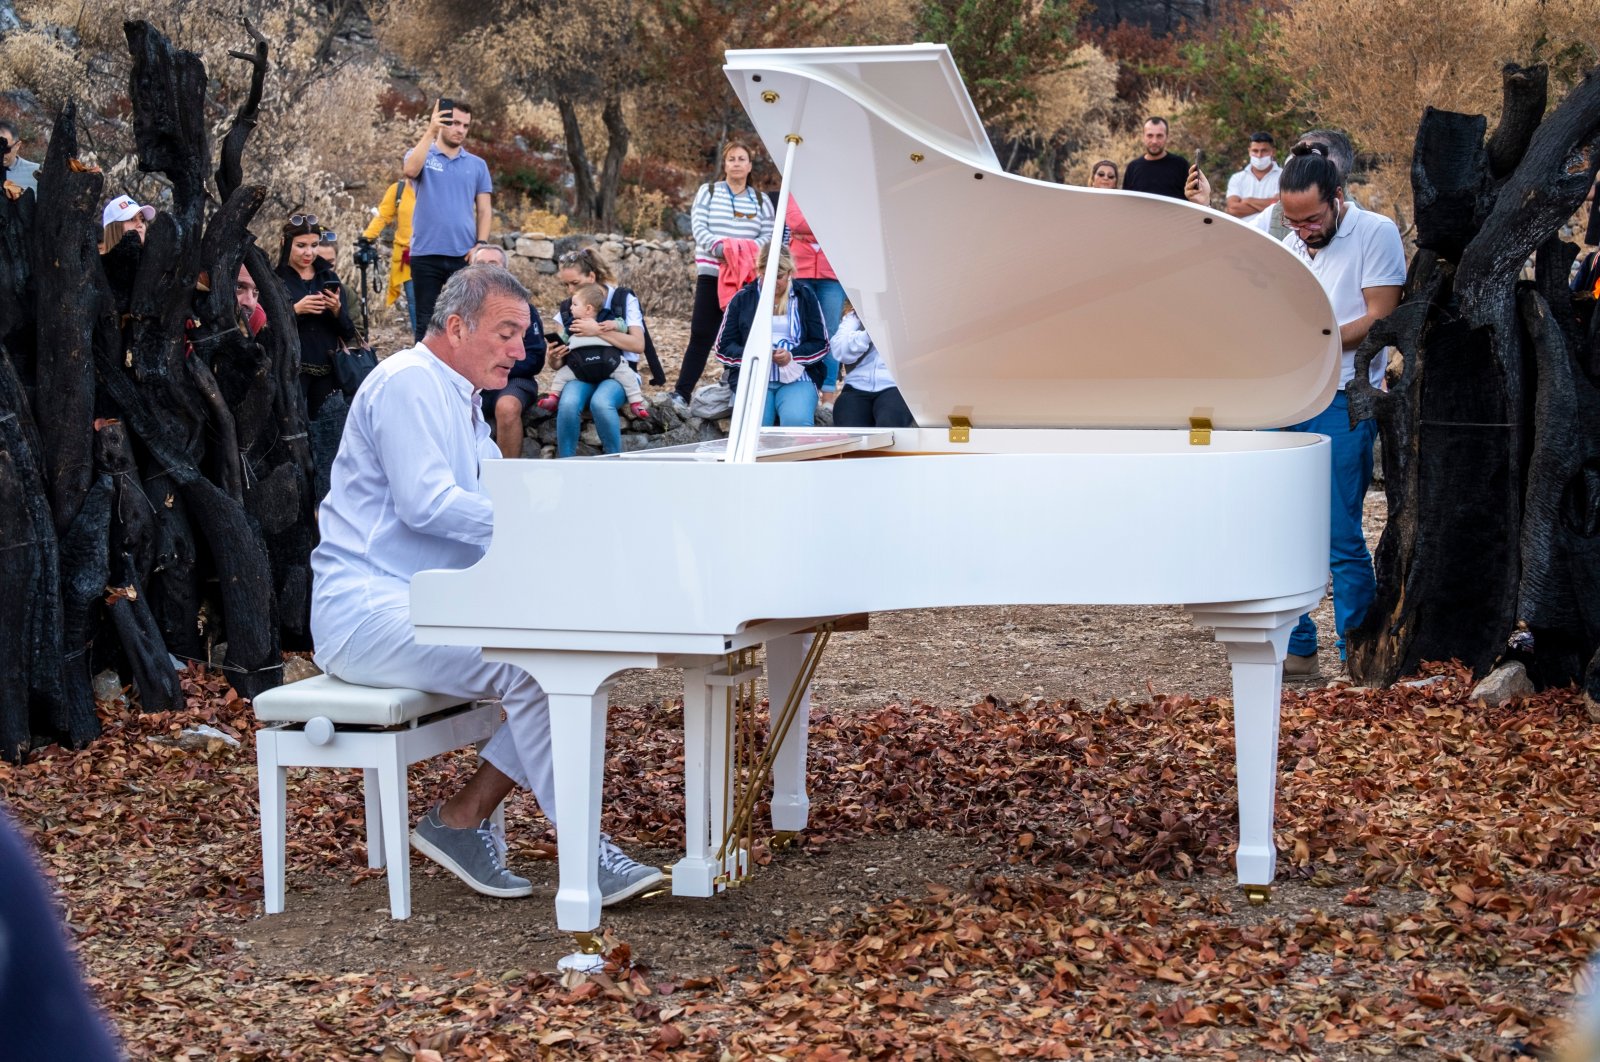 Pianist, Kerem Gorsev playing live open air on a white piano at "The Bodrum Cup" sailing festival for awareness of forest fires, Bodrum, Muğla, Türkiye, Oct. 21, 2021. (Shutterstock Photo)